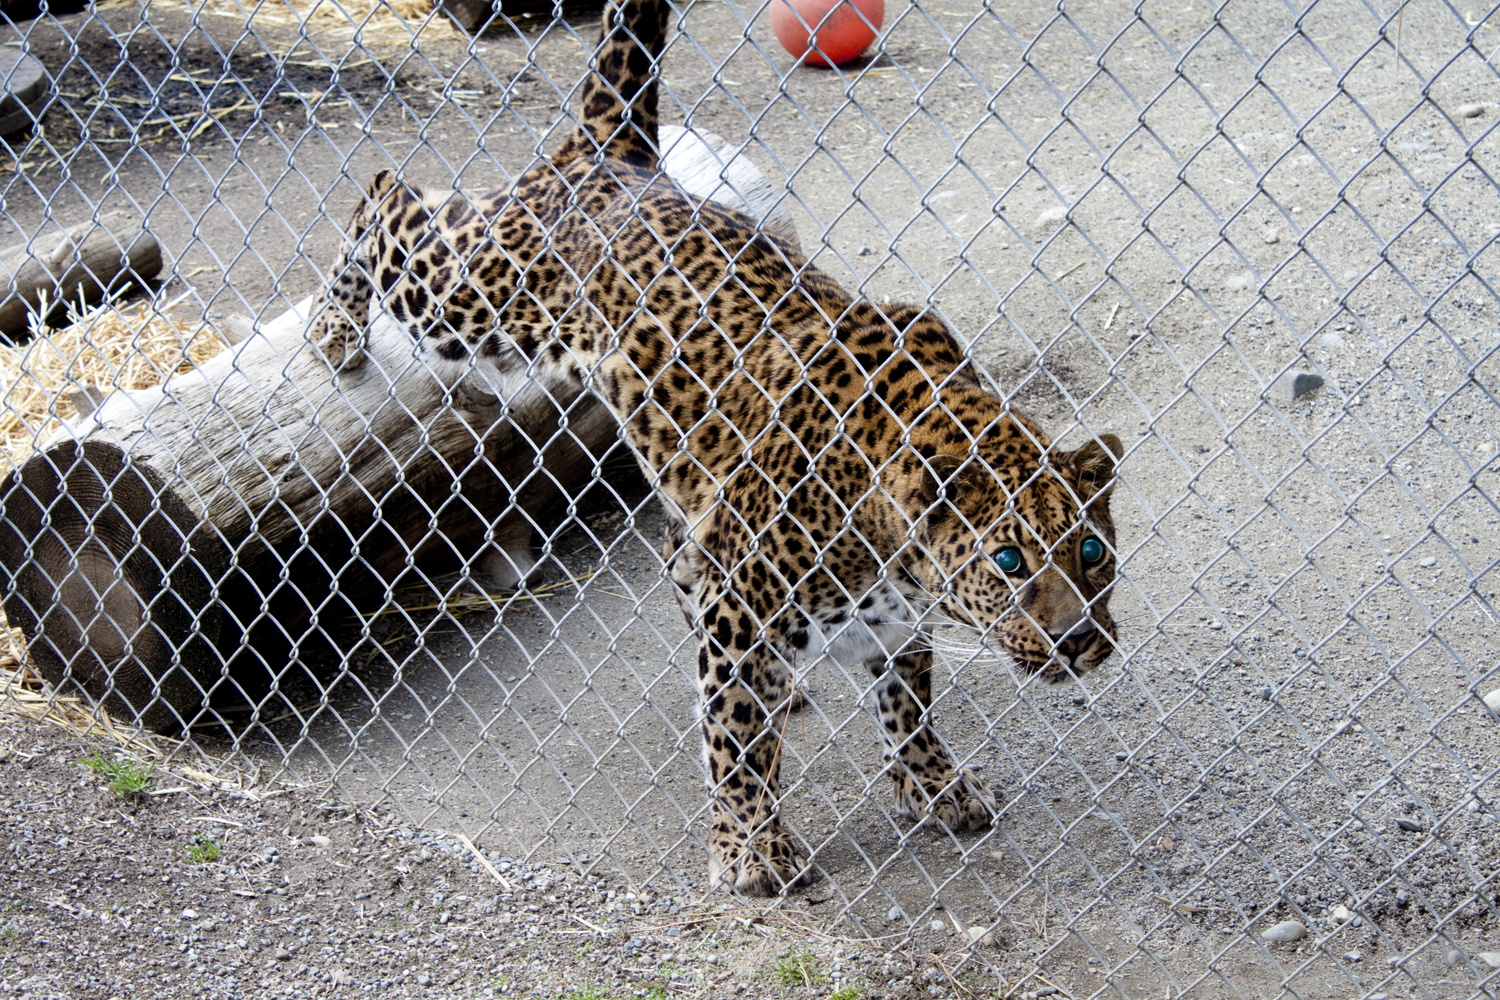 This jaguar is hungry! He's eyeing the meat that the trainer has.